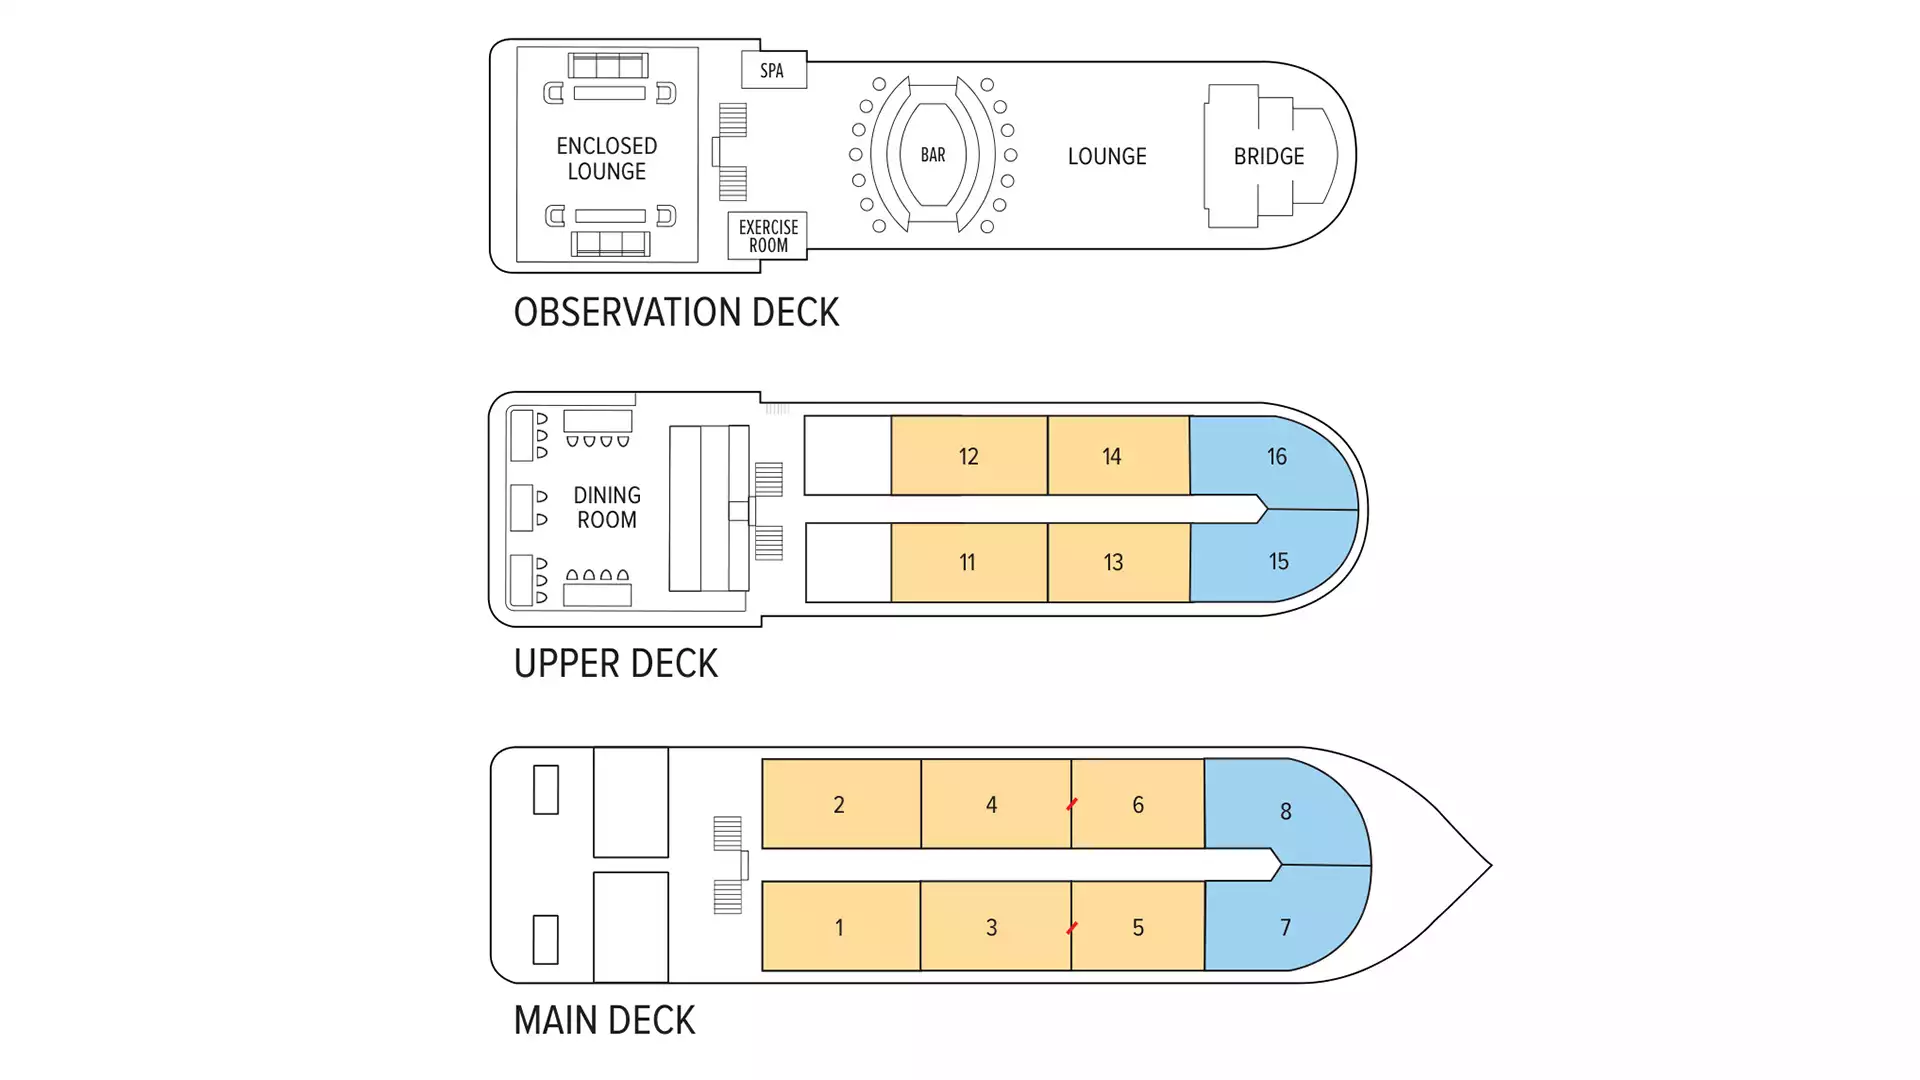 Deck plan of delfin II with orange and blue labels for room numbers and sizes and variery of decks aboard